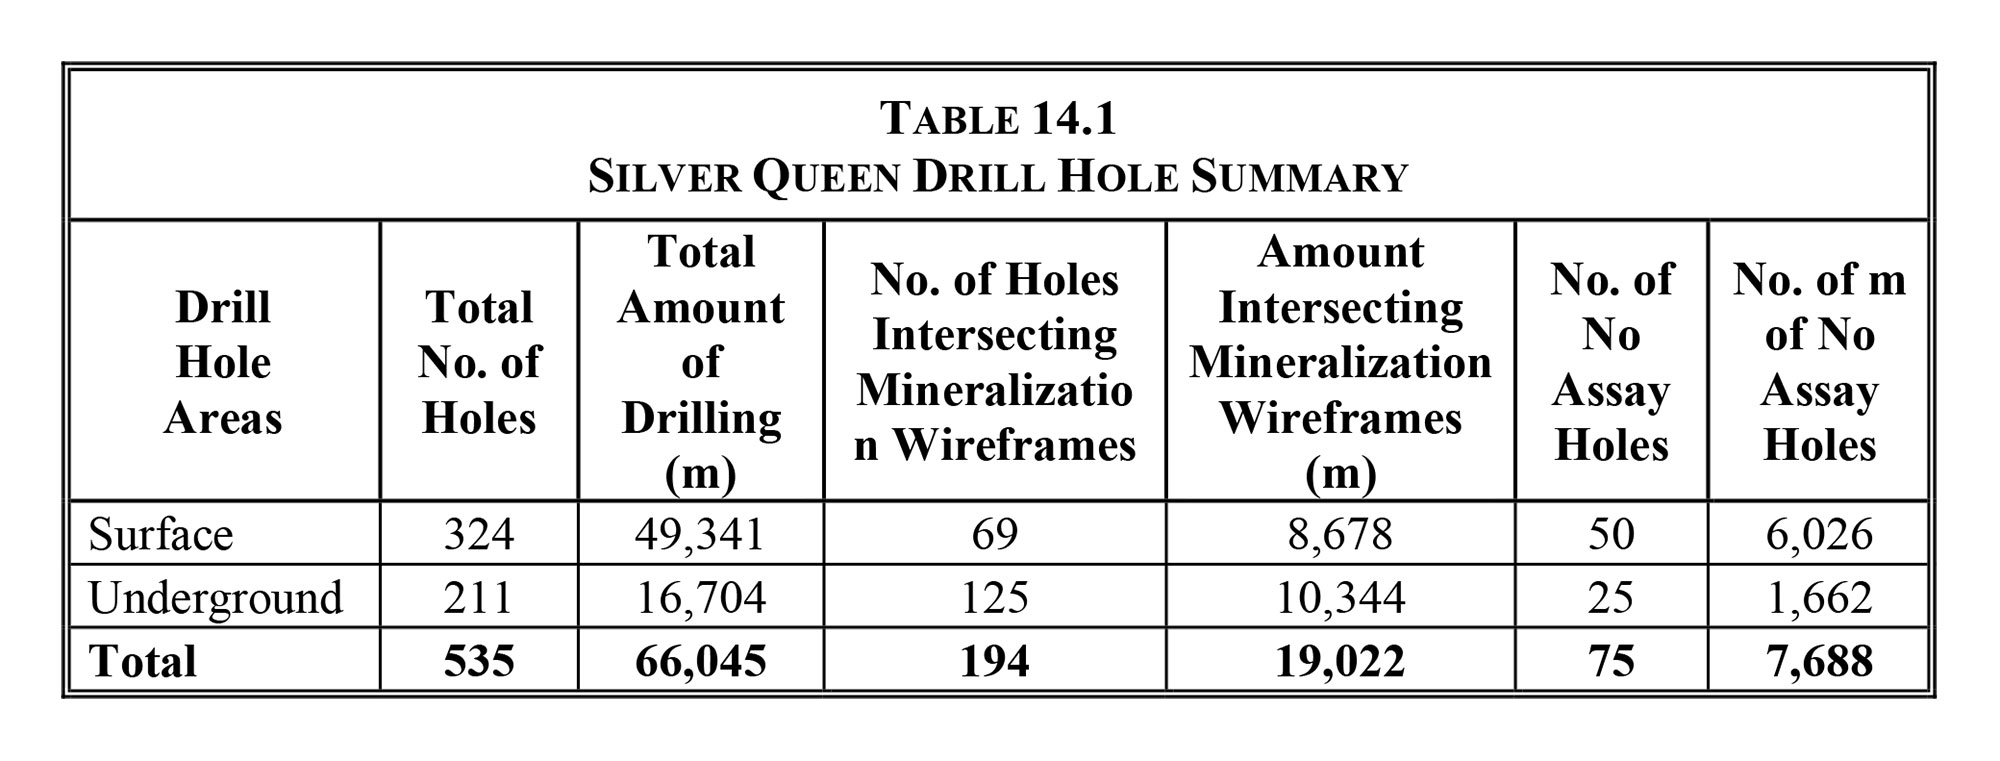 Silver Queen Drill Hole Summary